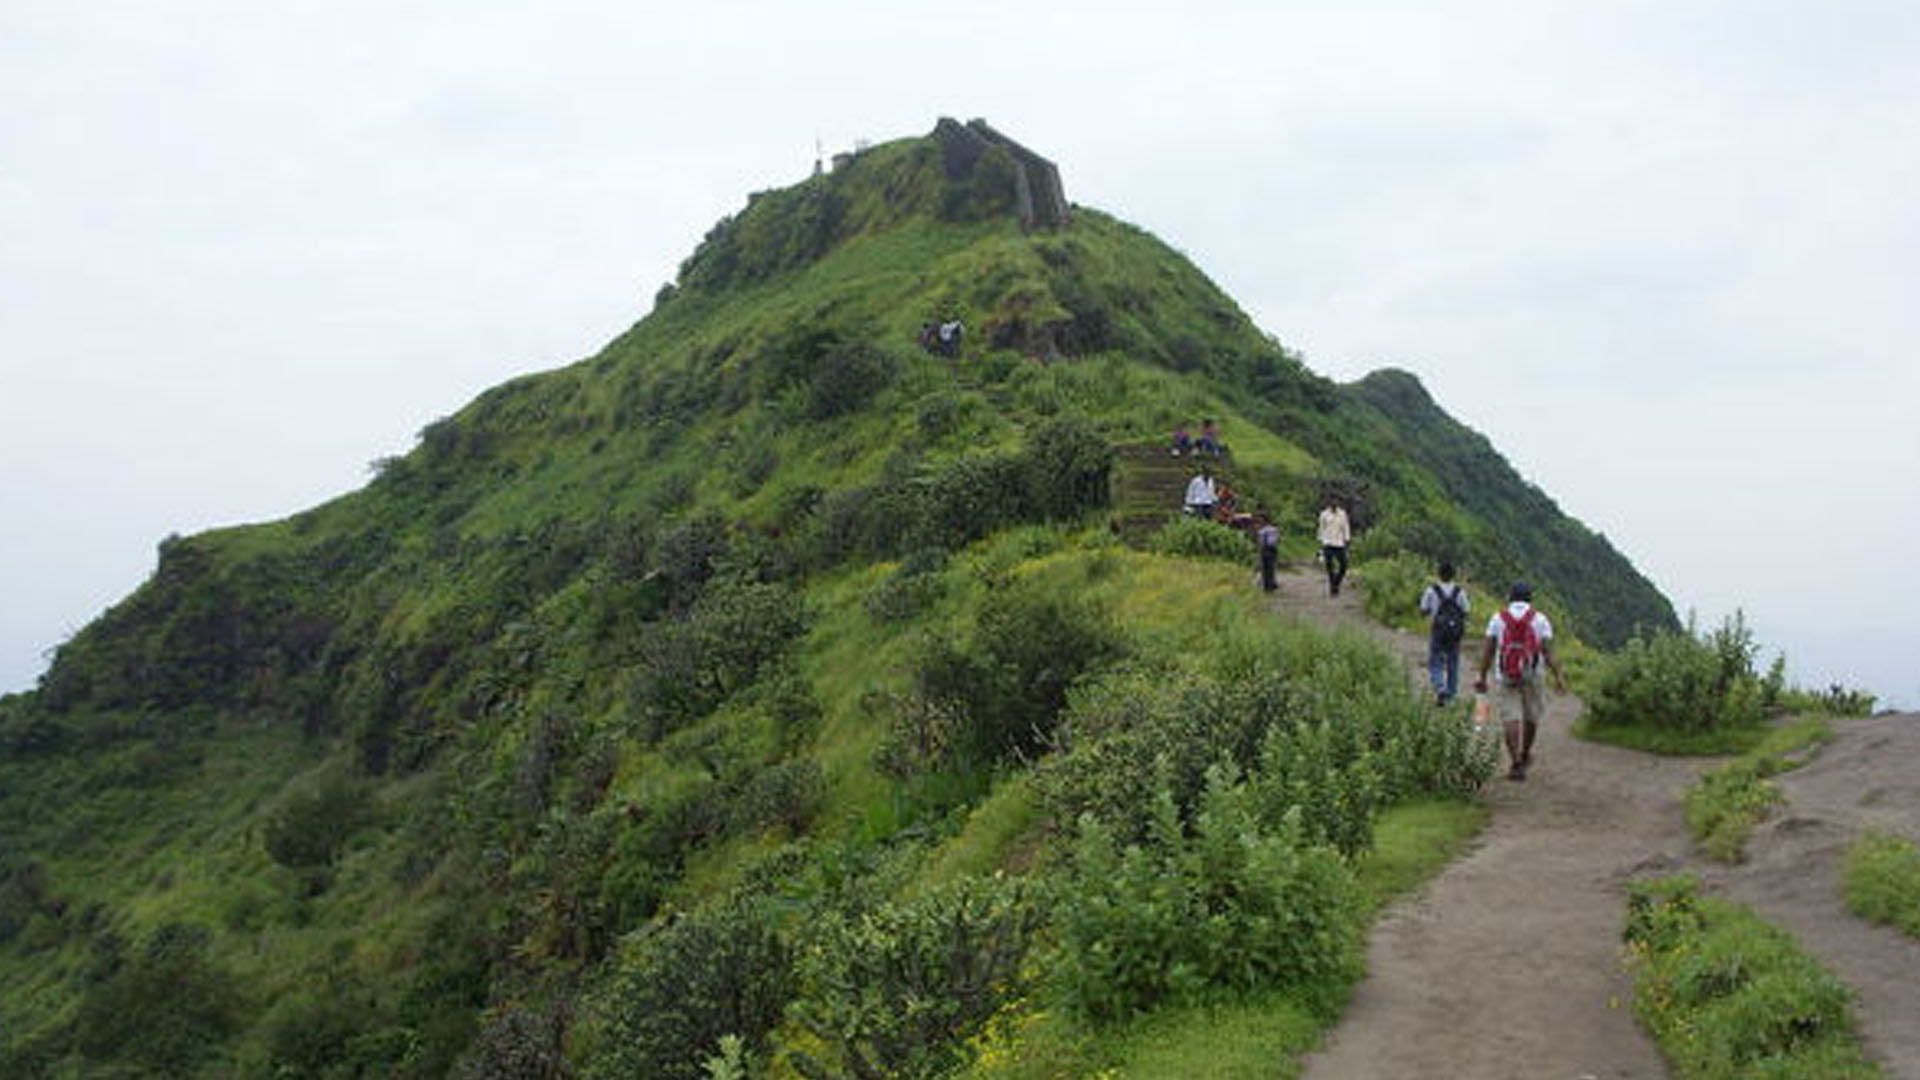 This Monsoon, a visit to Purandar Fort is must